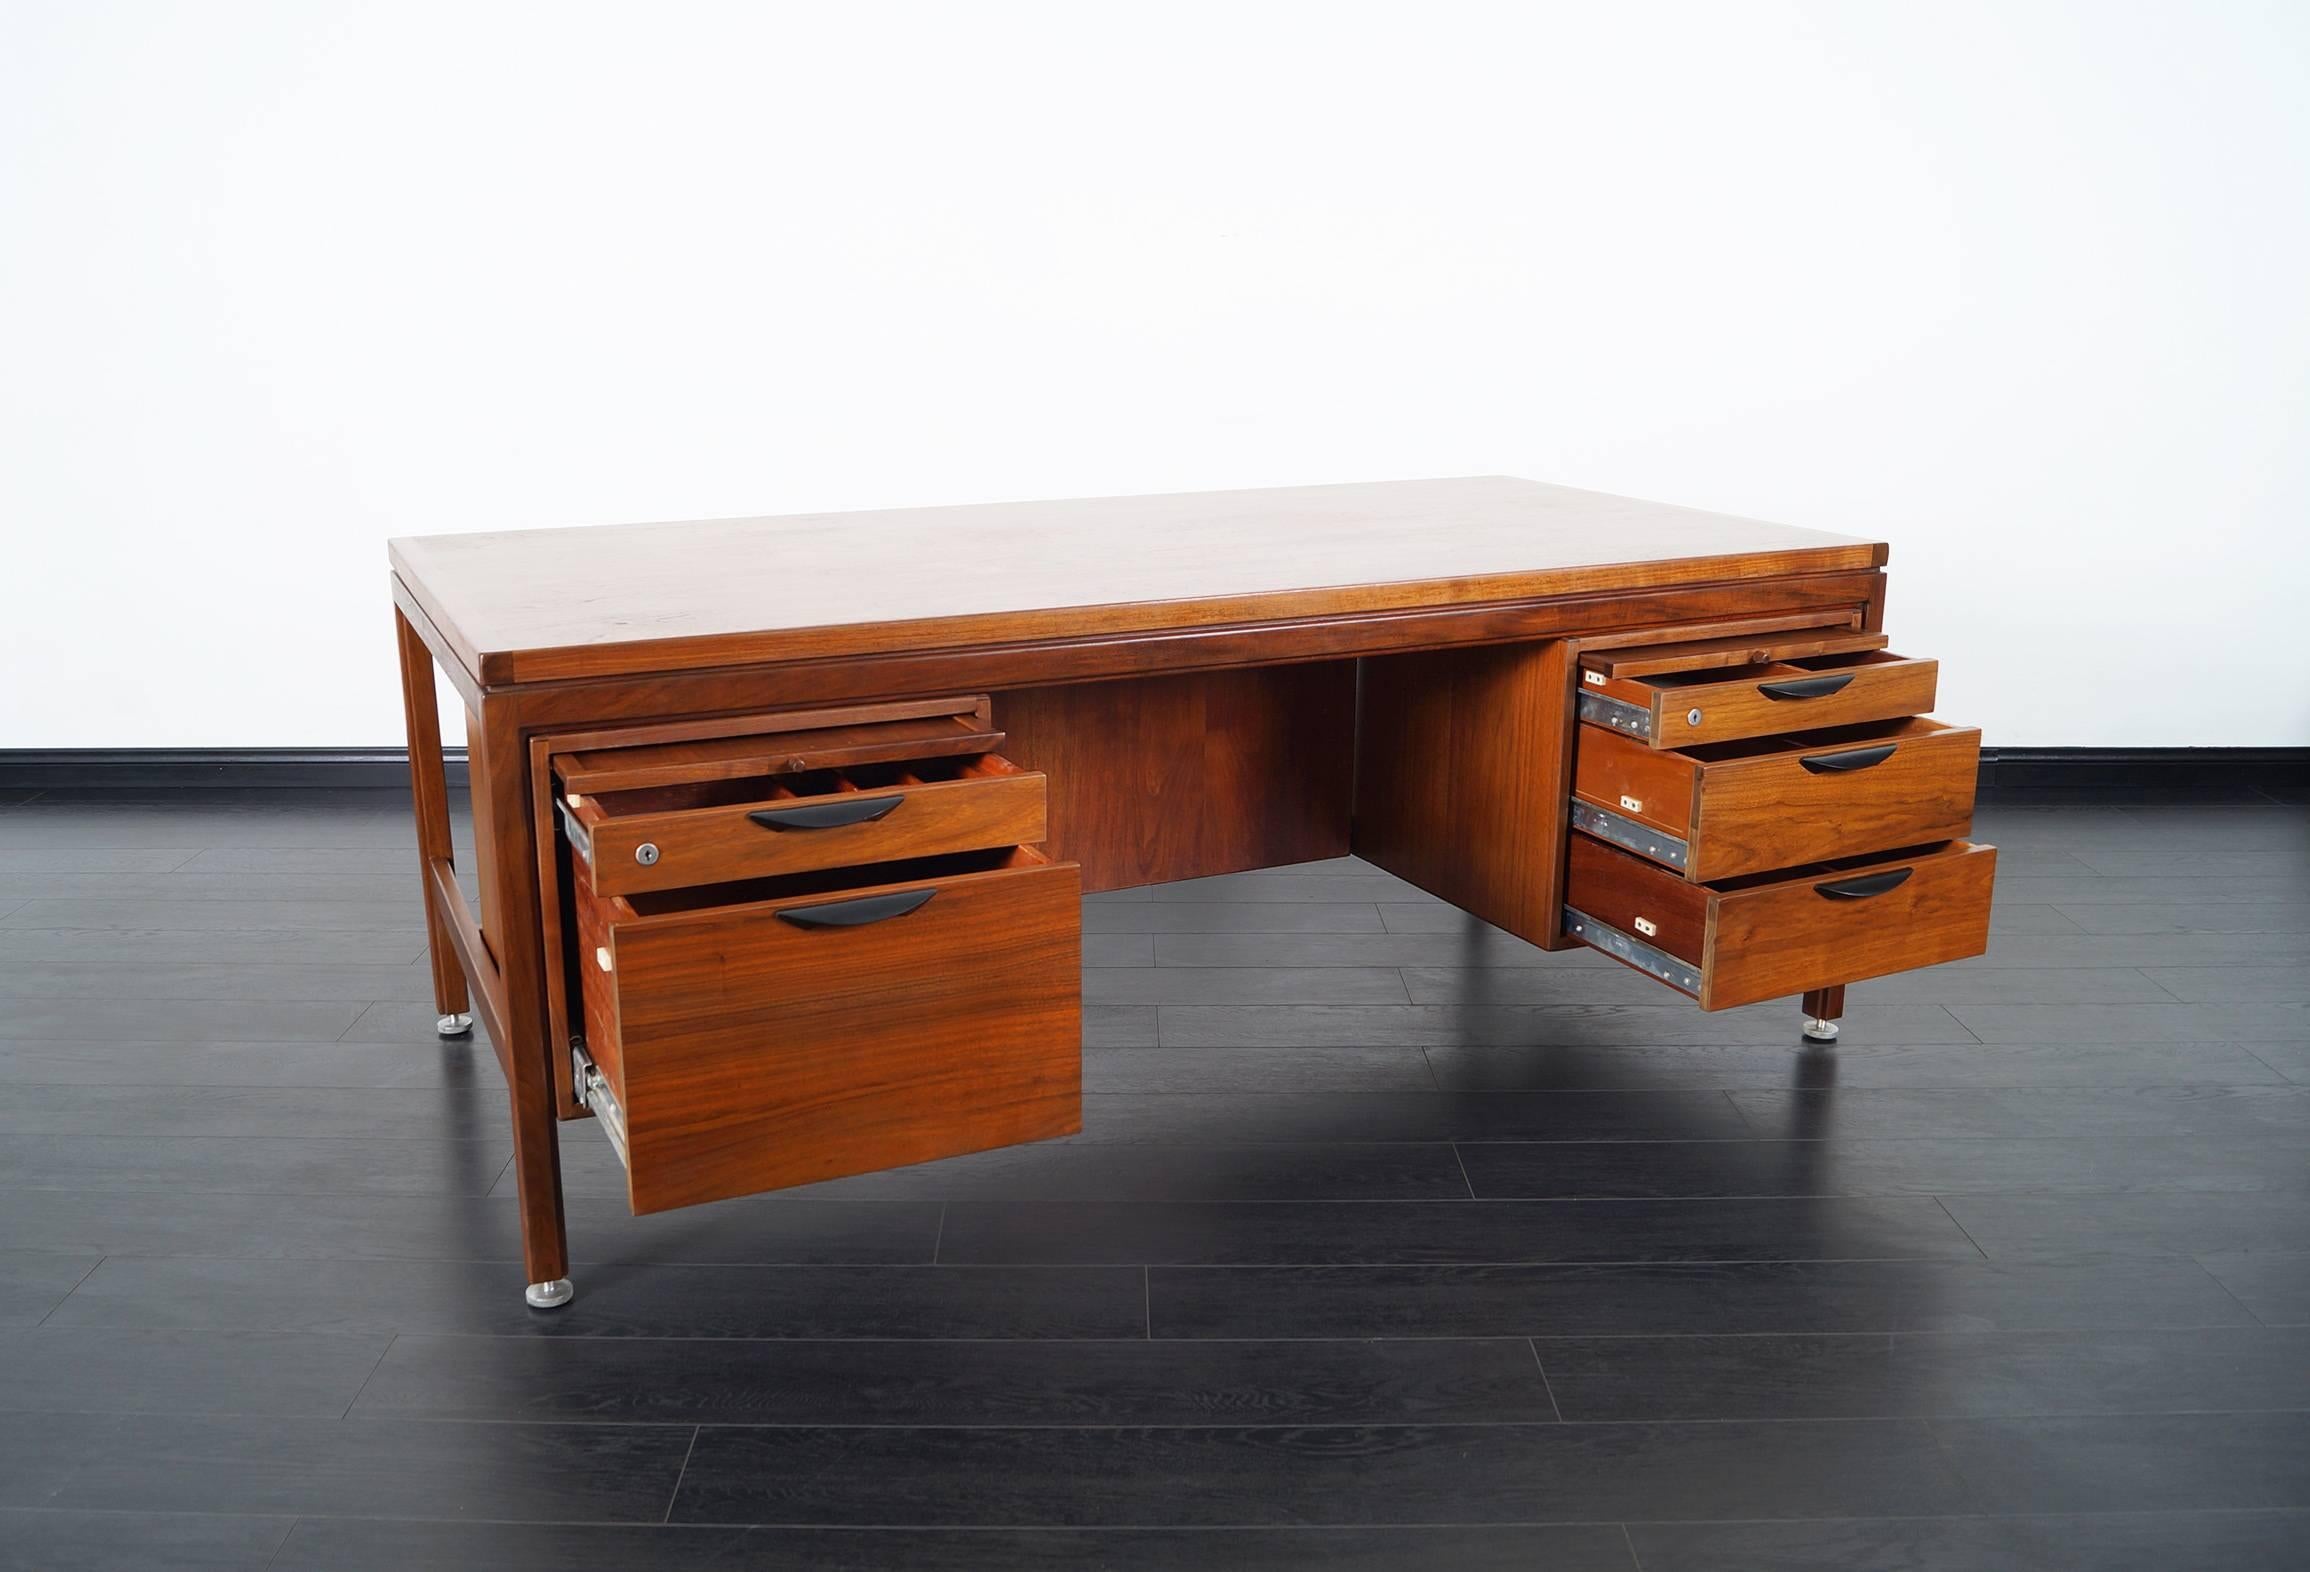 American Midcentury Executive Desk by Jens Risom